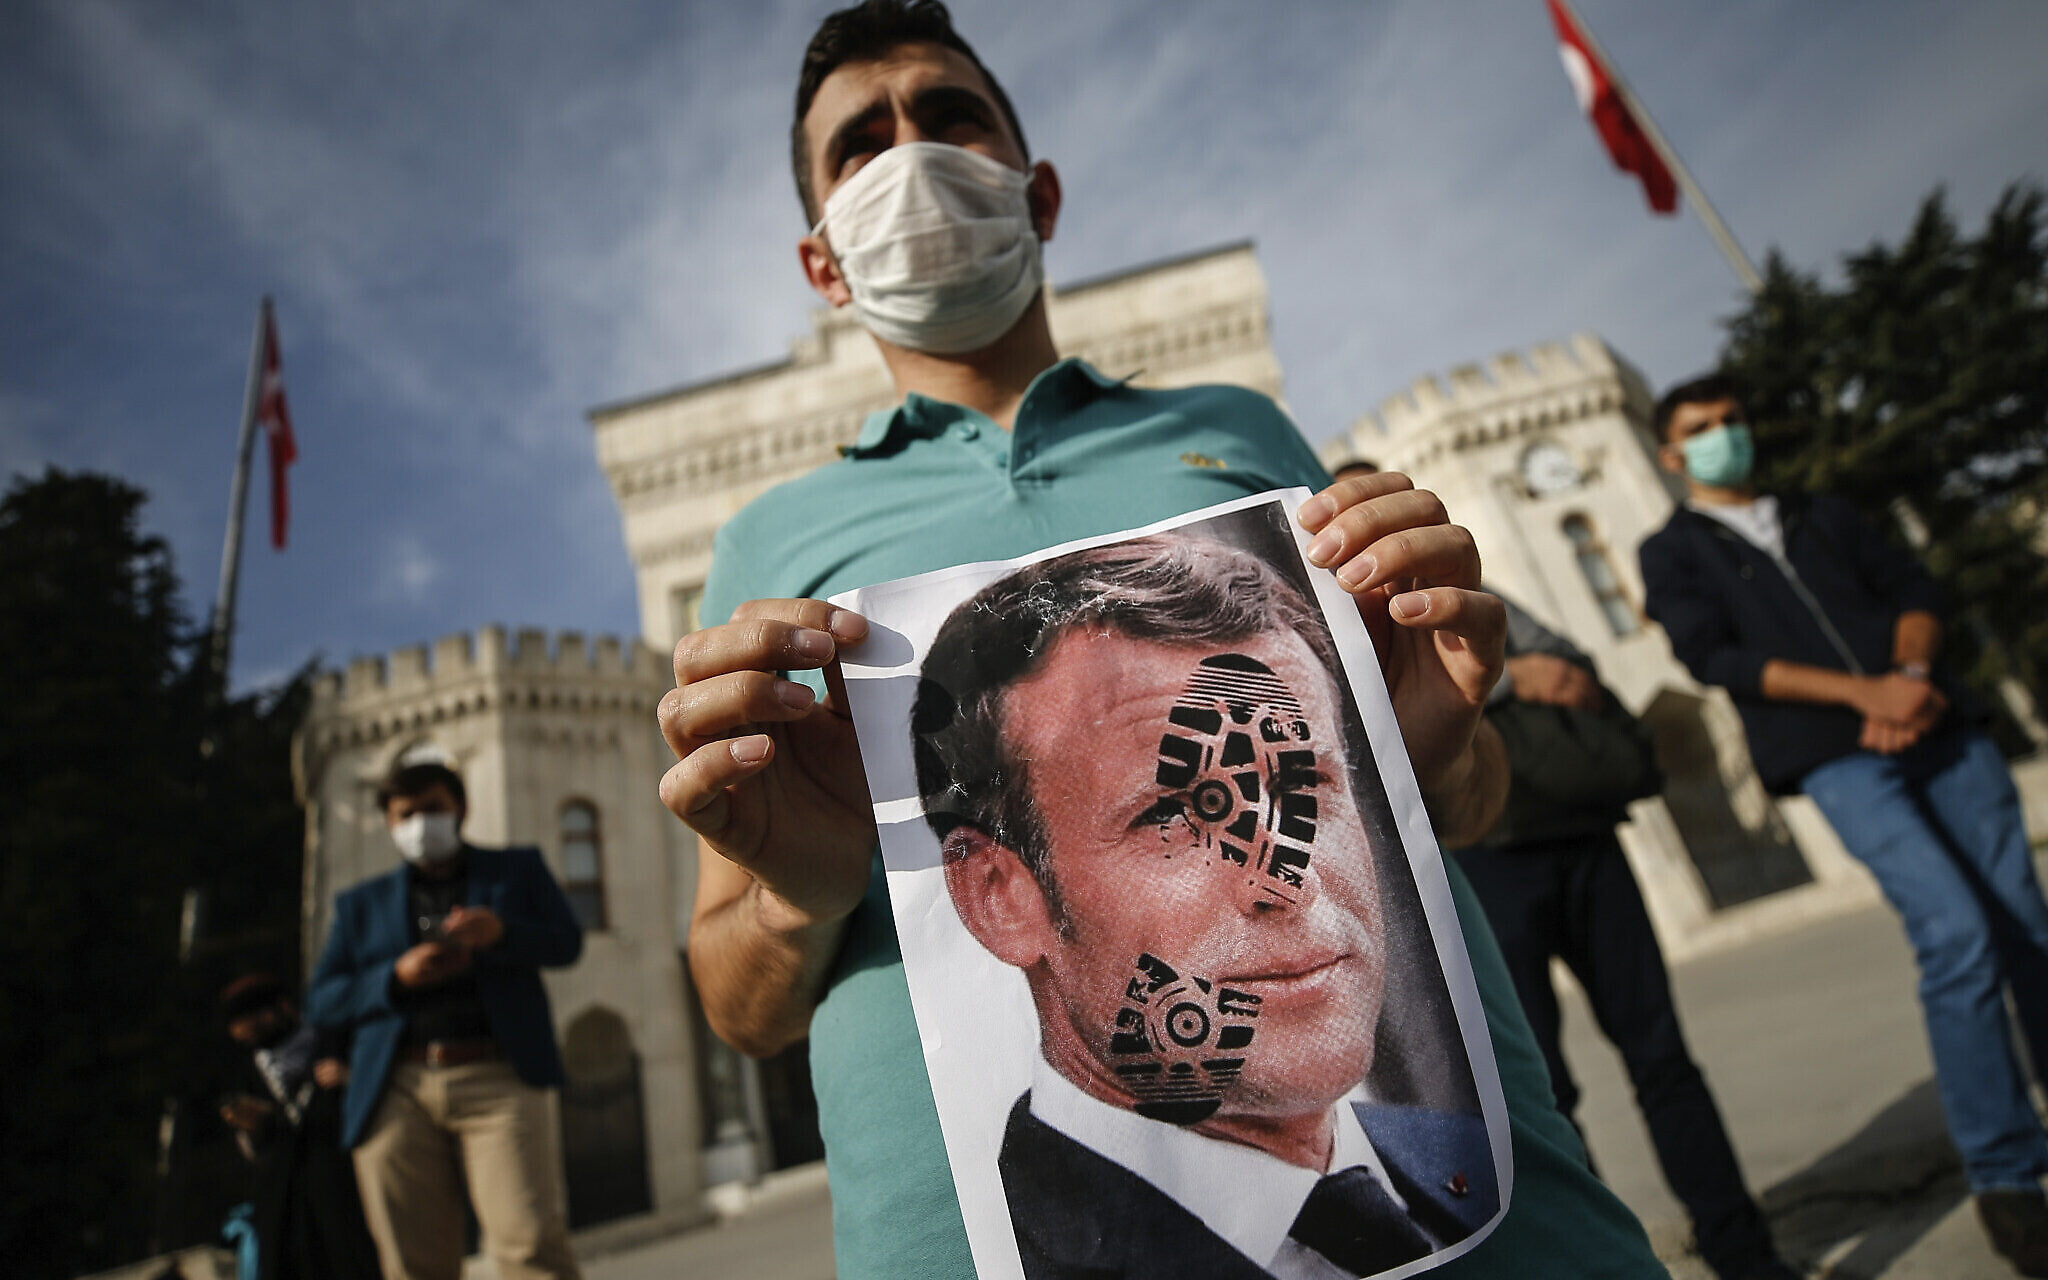 A youth holds a photograph of France's President Emmanuel Macron, stamped with a shoe mark, during a protest against France in Istanbul, Sunday, Oct. 25, 2020. Turkish President Recep Tayyip Erdogan on Sunday challenged the United States to impose sanctions against his country while also launching a second attack on French President Emmanuel Macron. Speaking a day after he suggested Macron needed mental health treatment because of his attitude to Islam and Muslims, which prompted France to recall its ambassador to Ankara, Erdogan took aim at foreign critics. (AP Photo/Emrah Gurel)